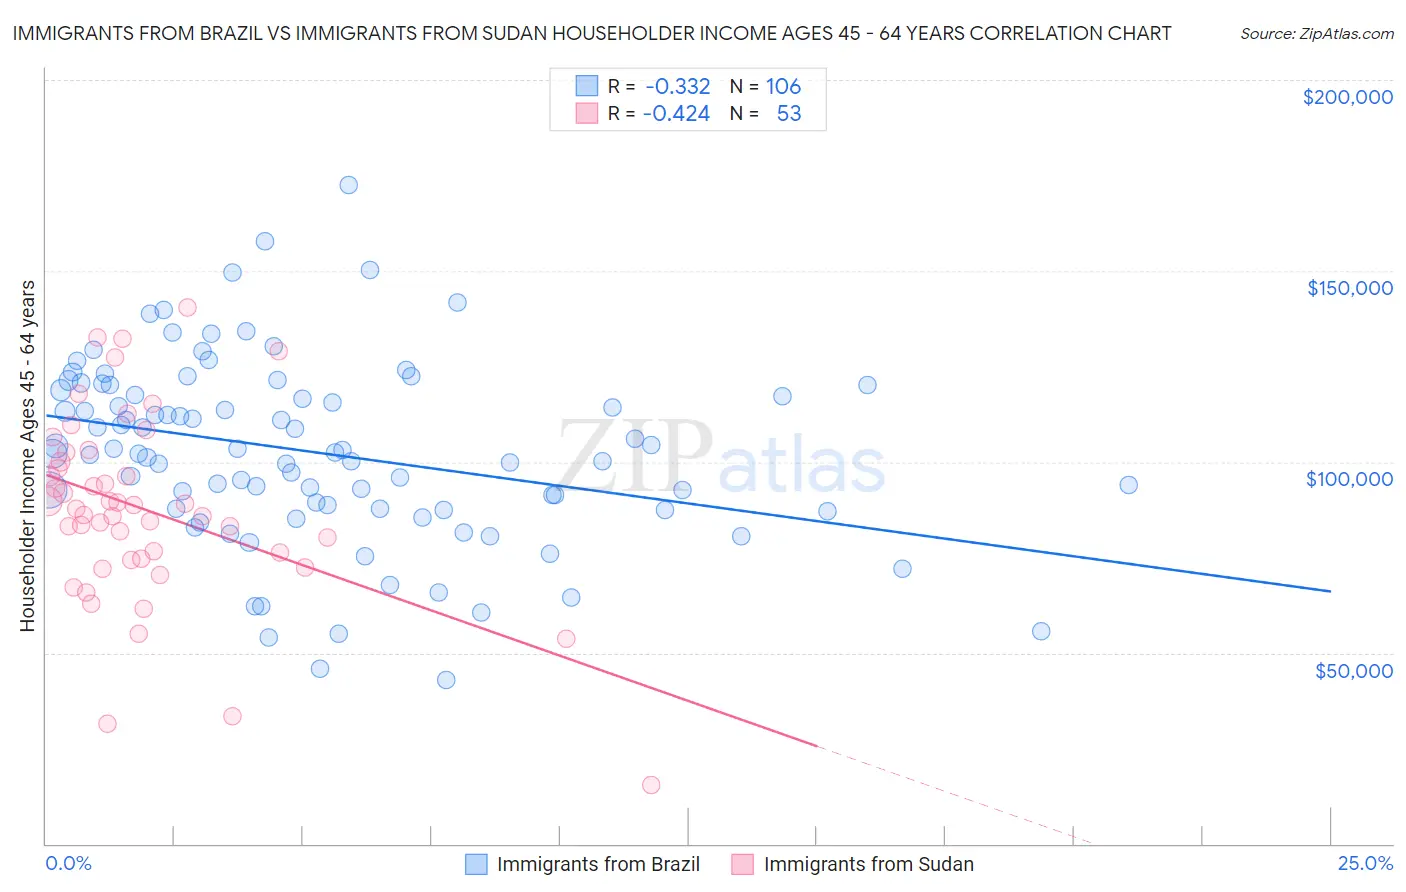 Immigrants from Brazil vs Immigrants from Sudan Householder Income Ages 45 - 64 years